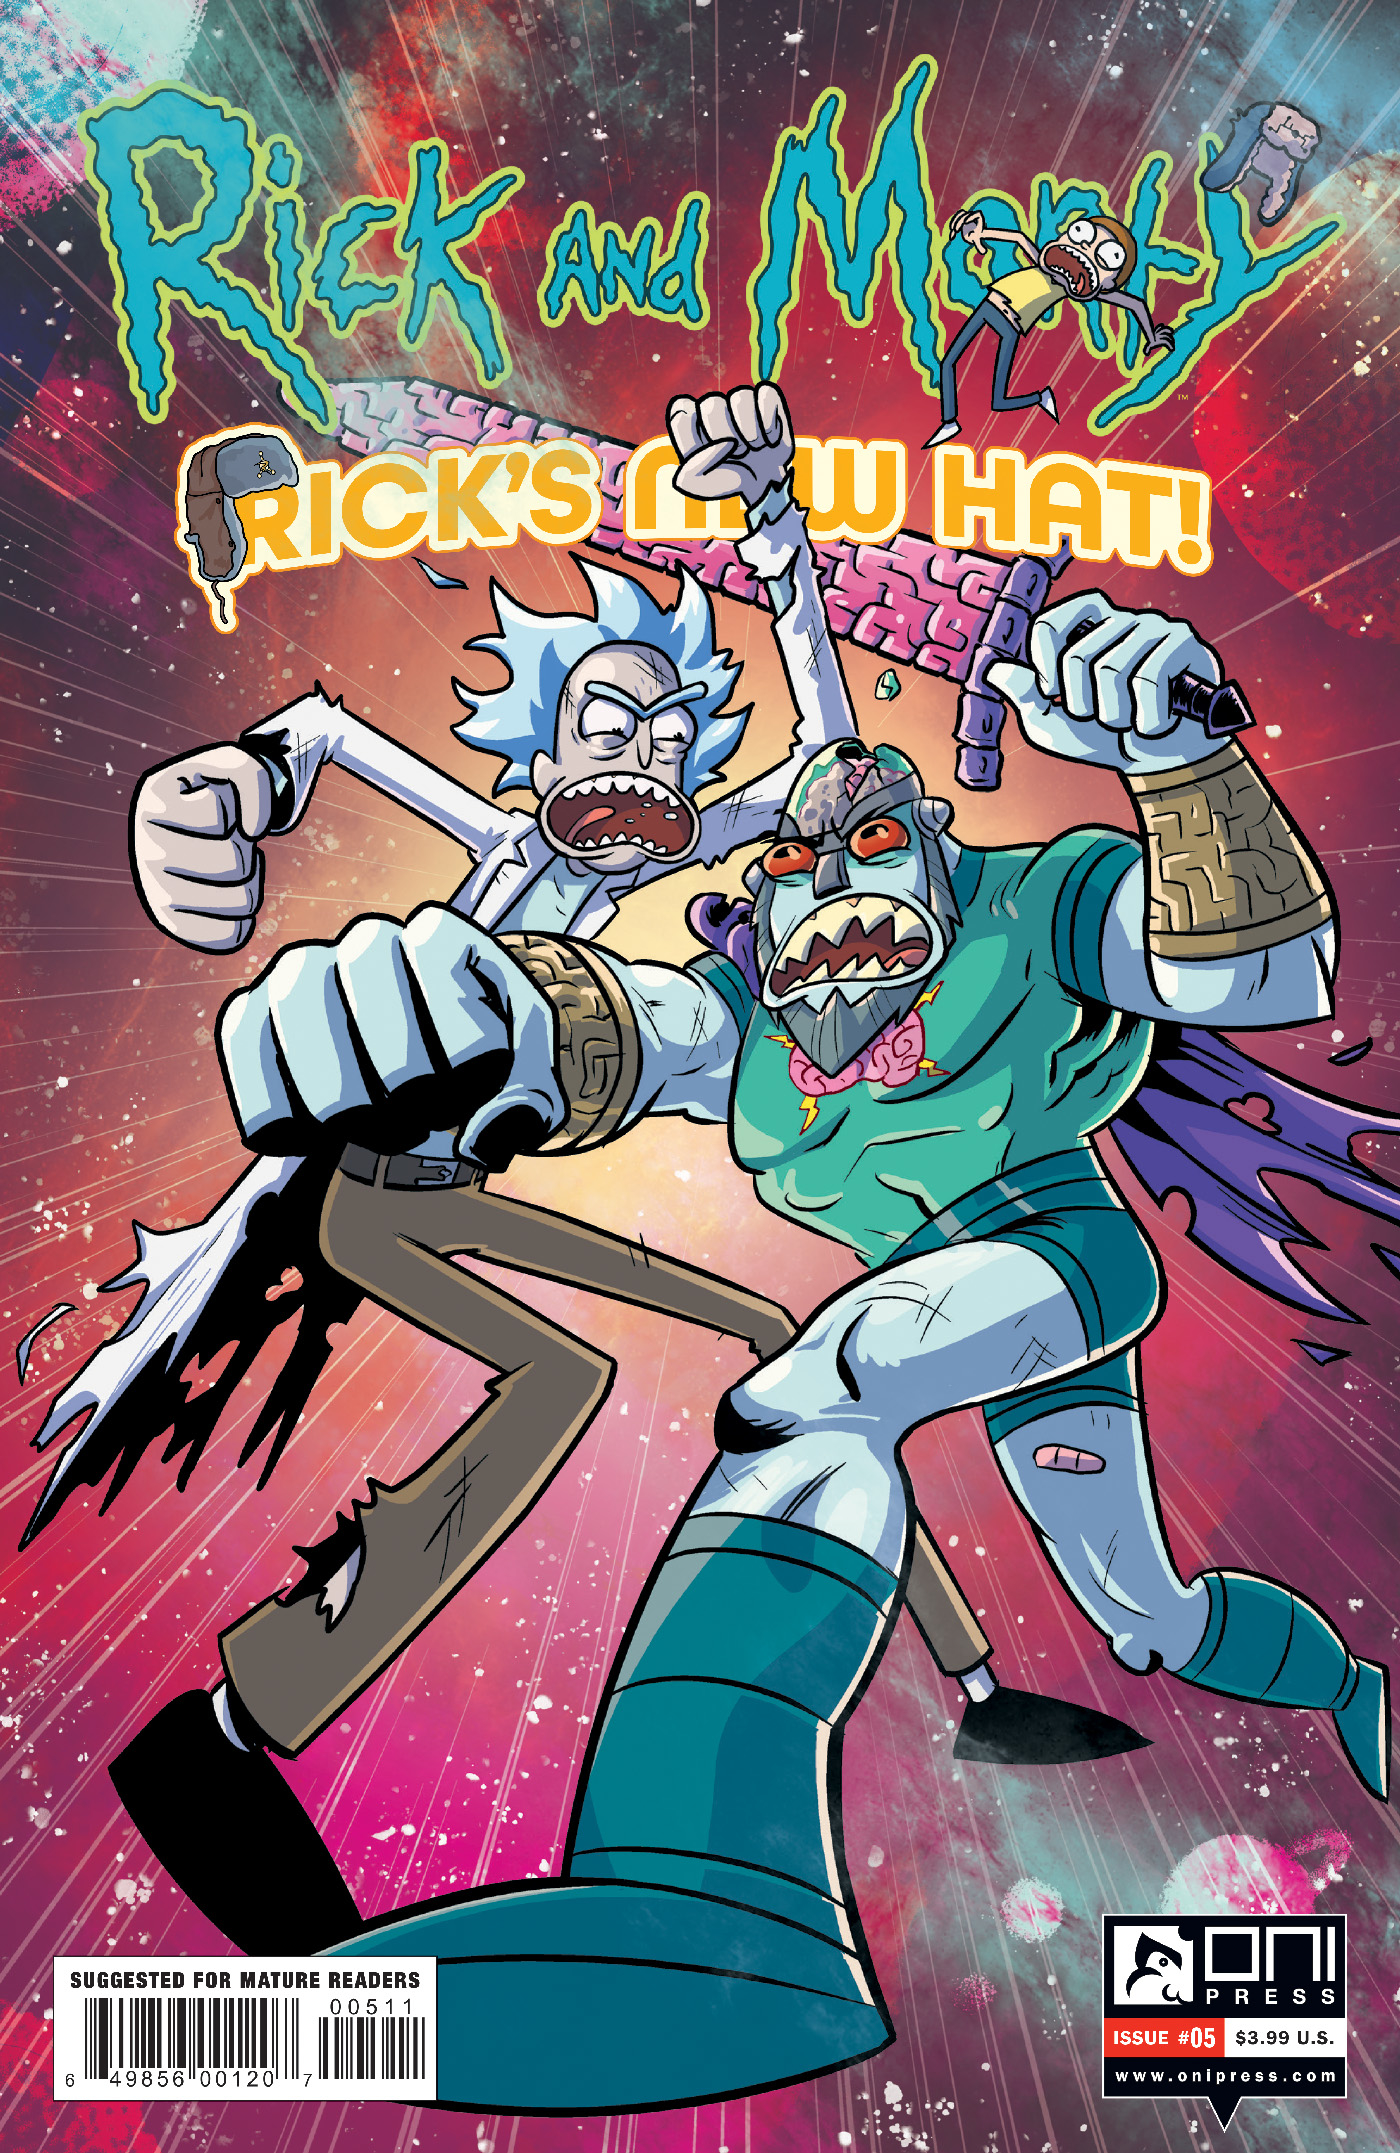 Rick and Morty Ricks New Hat #5 Cover A Stresing